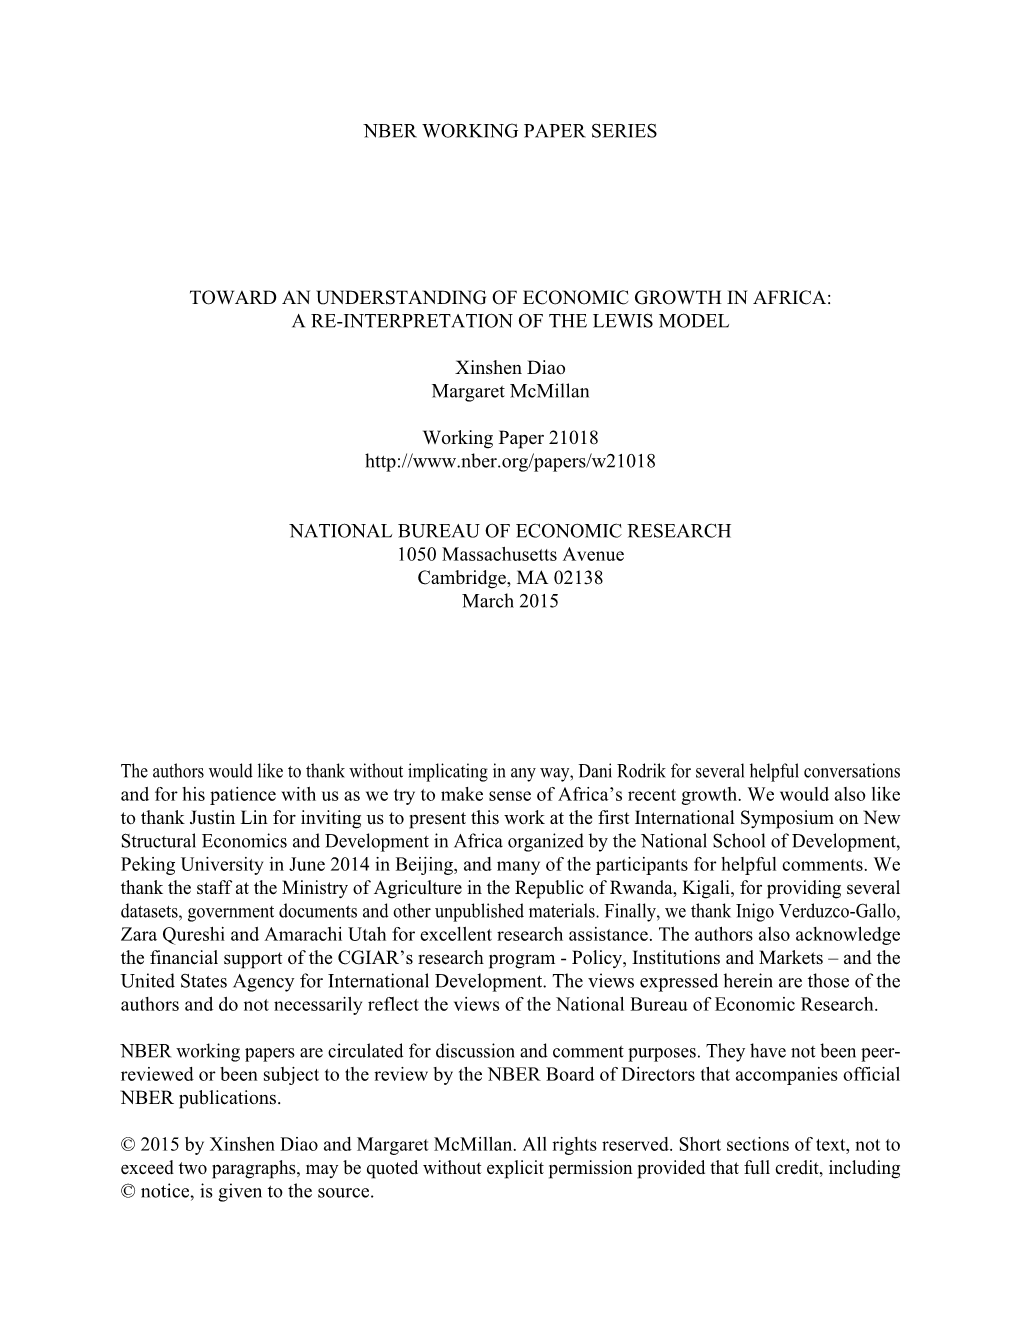 Toward an Understanding of Economic Growth in Africa: a Re-Interpretation of the Lewis Model